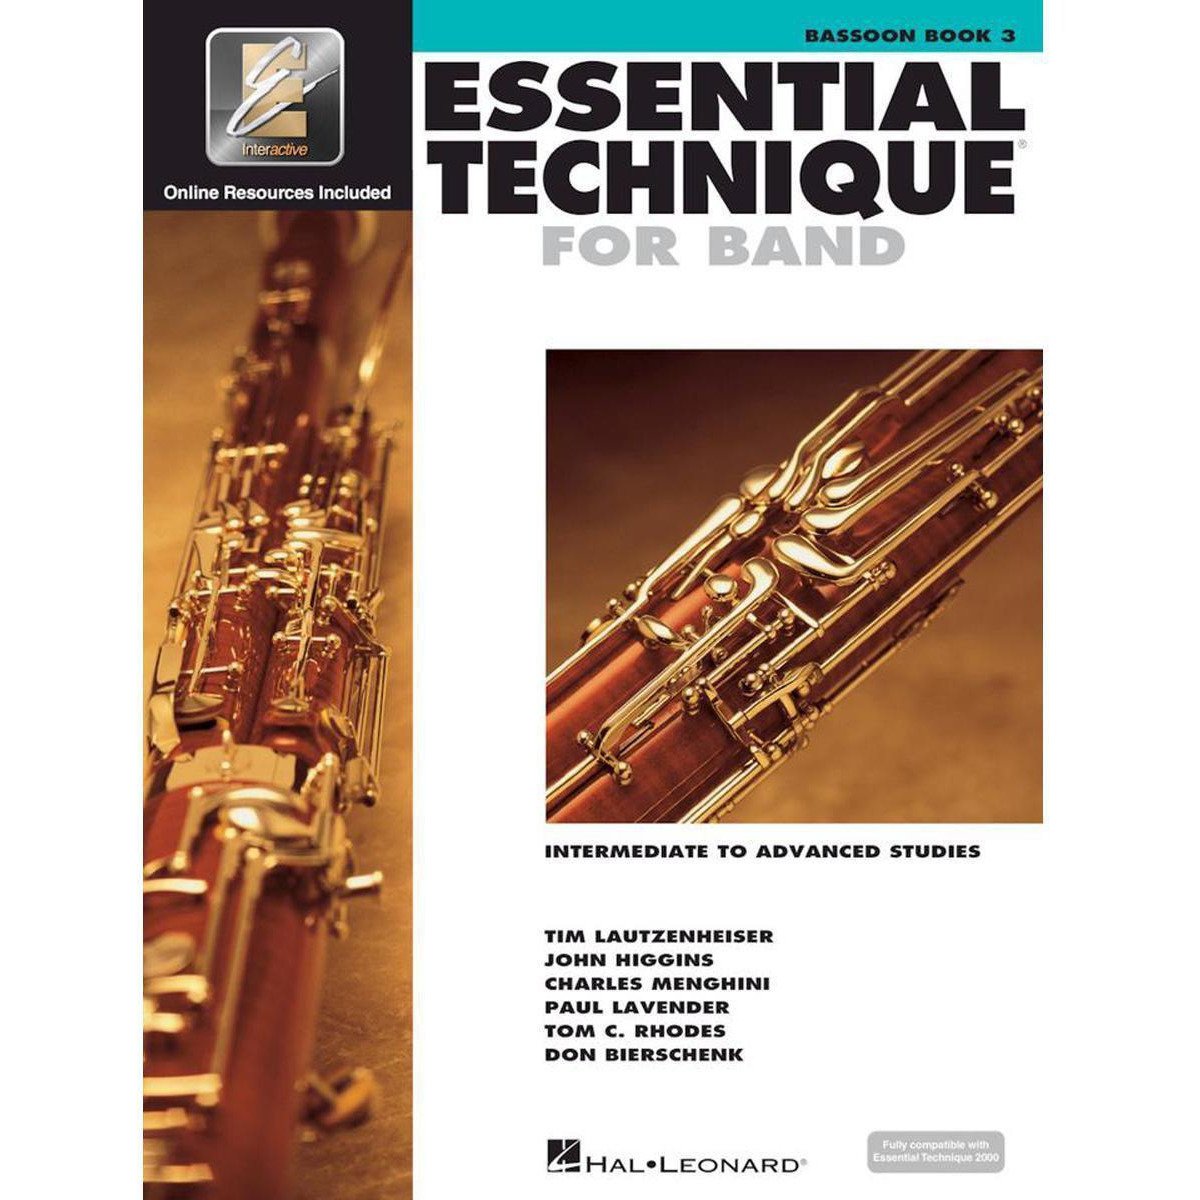 Essential Technique for Band Book 3-Bassoon-Andy's Music